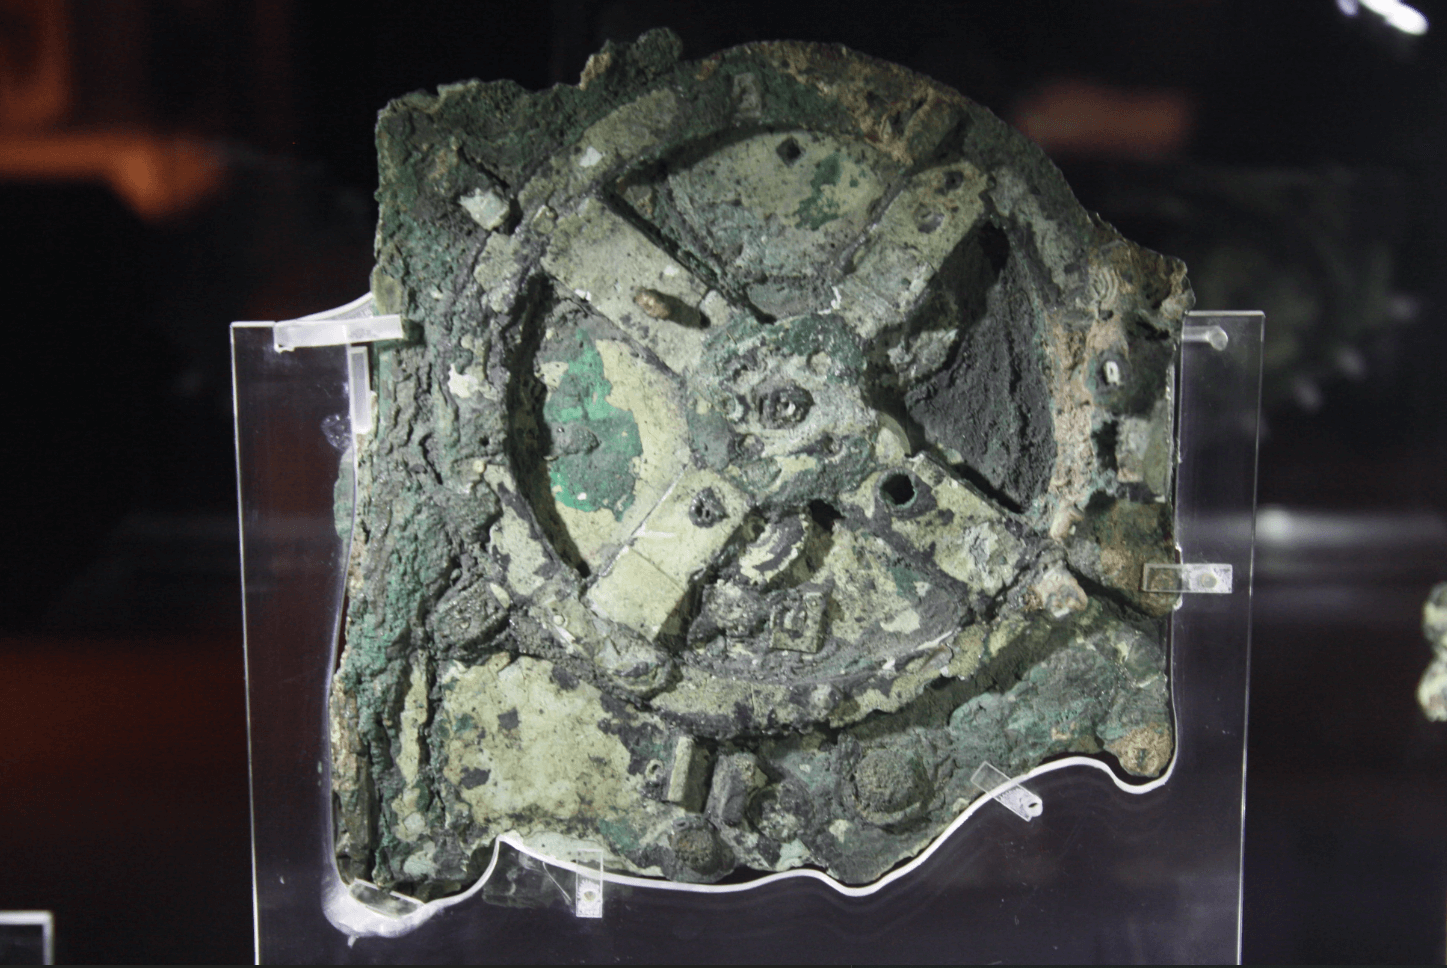 82 rusty pieces of the Antikythera Mechanism are on display in the National Archaeological Museum in Athens